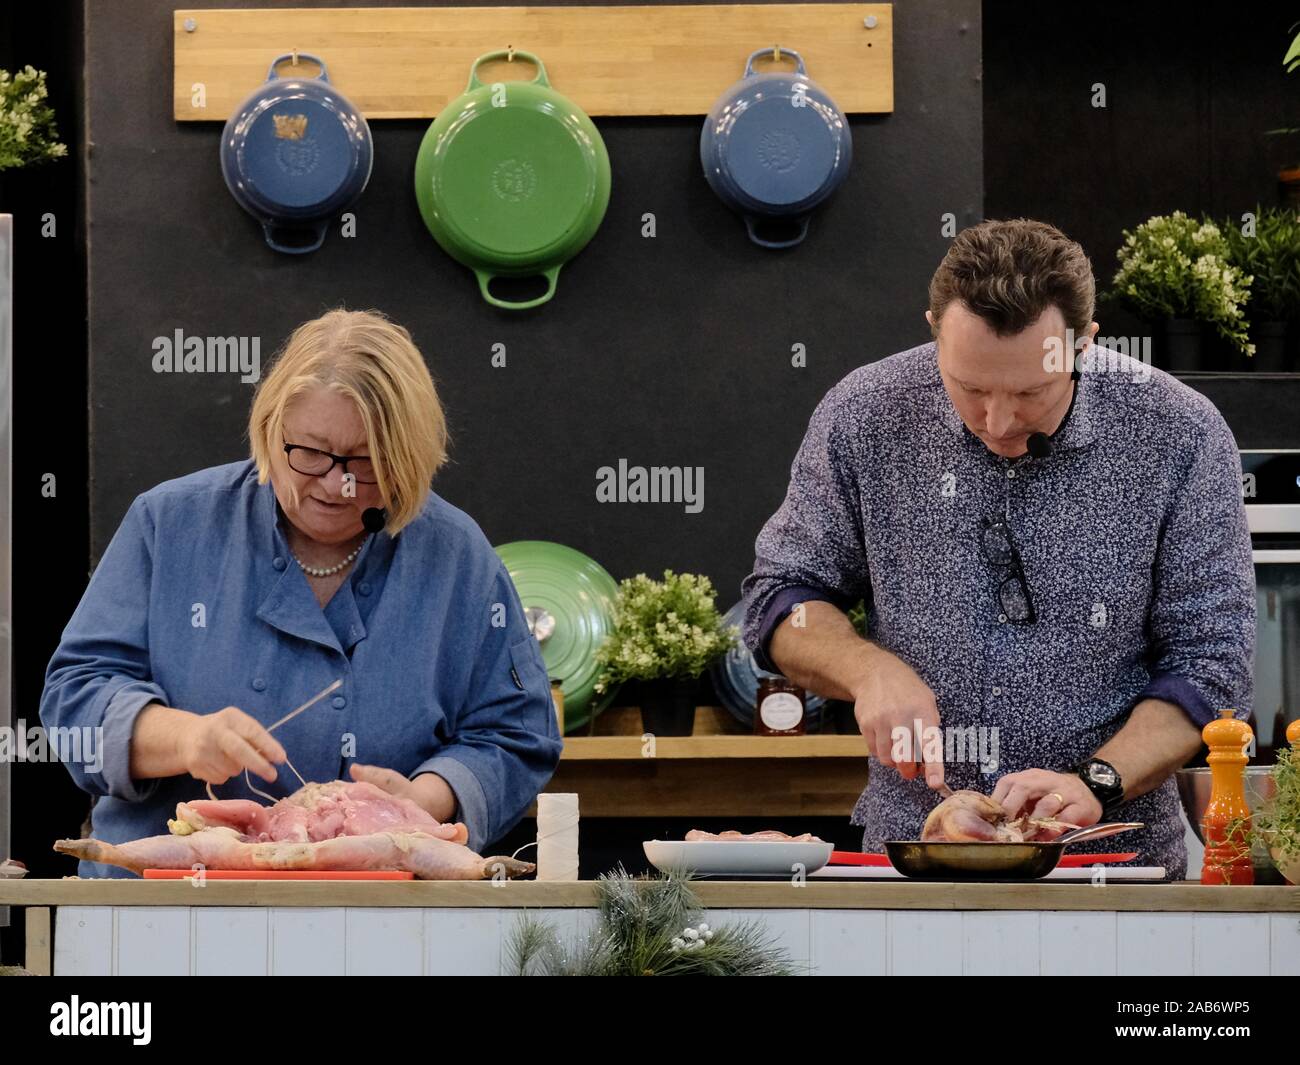 TV chef Rosemary Shrager gives a cookery demonstration at the Ideal Home Show Christmas 2019 at London Olympia's Exhibition Hall. Stock Photo